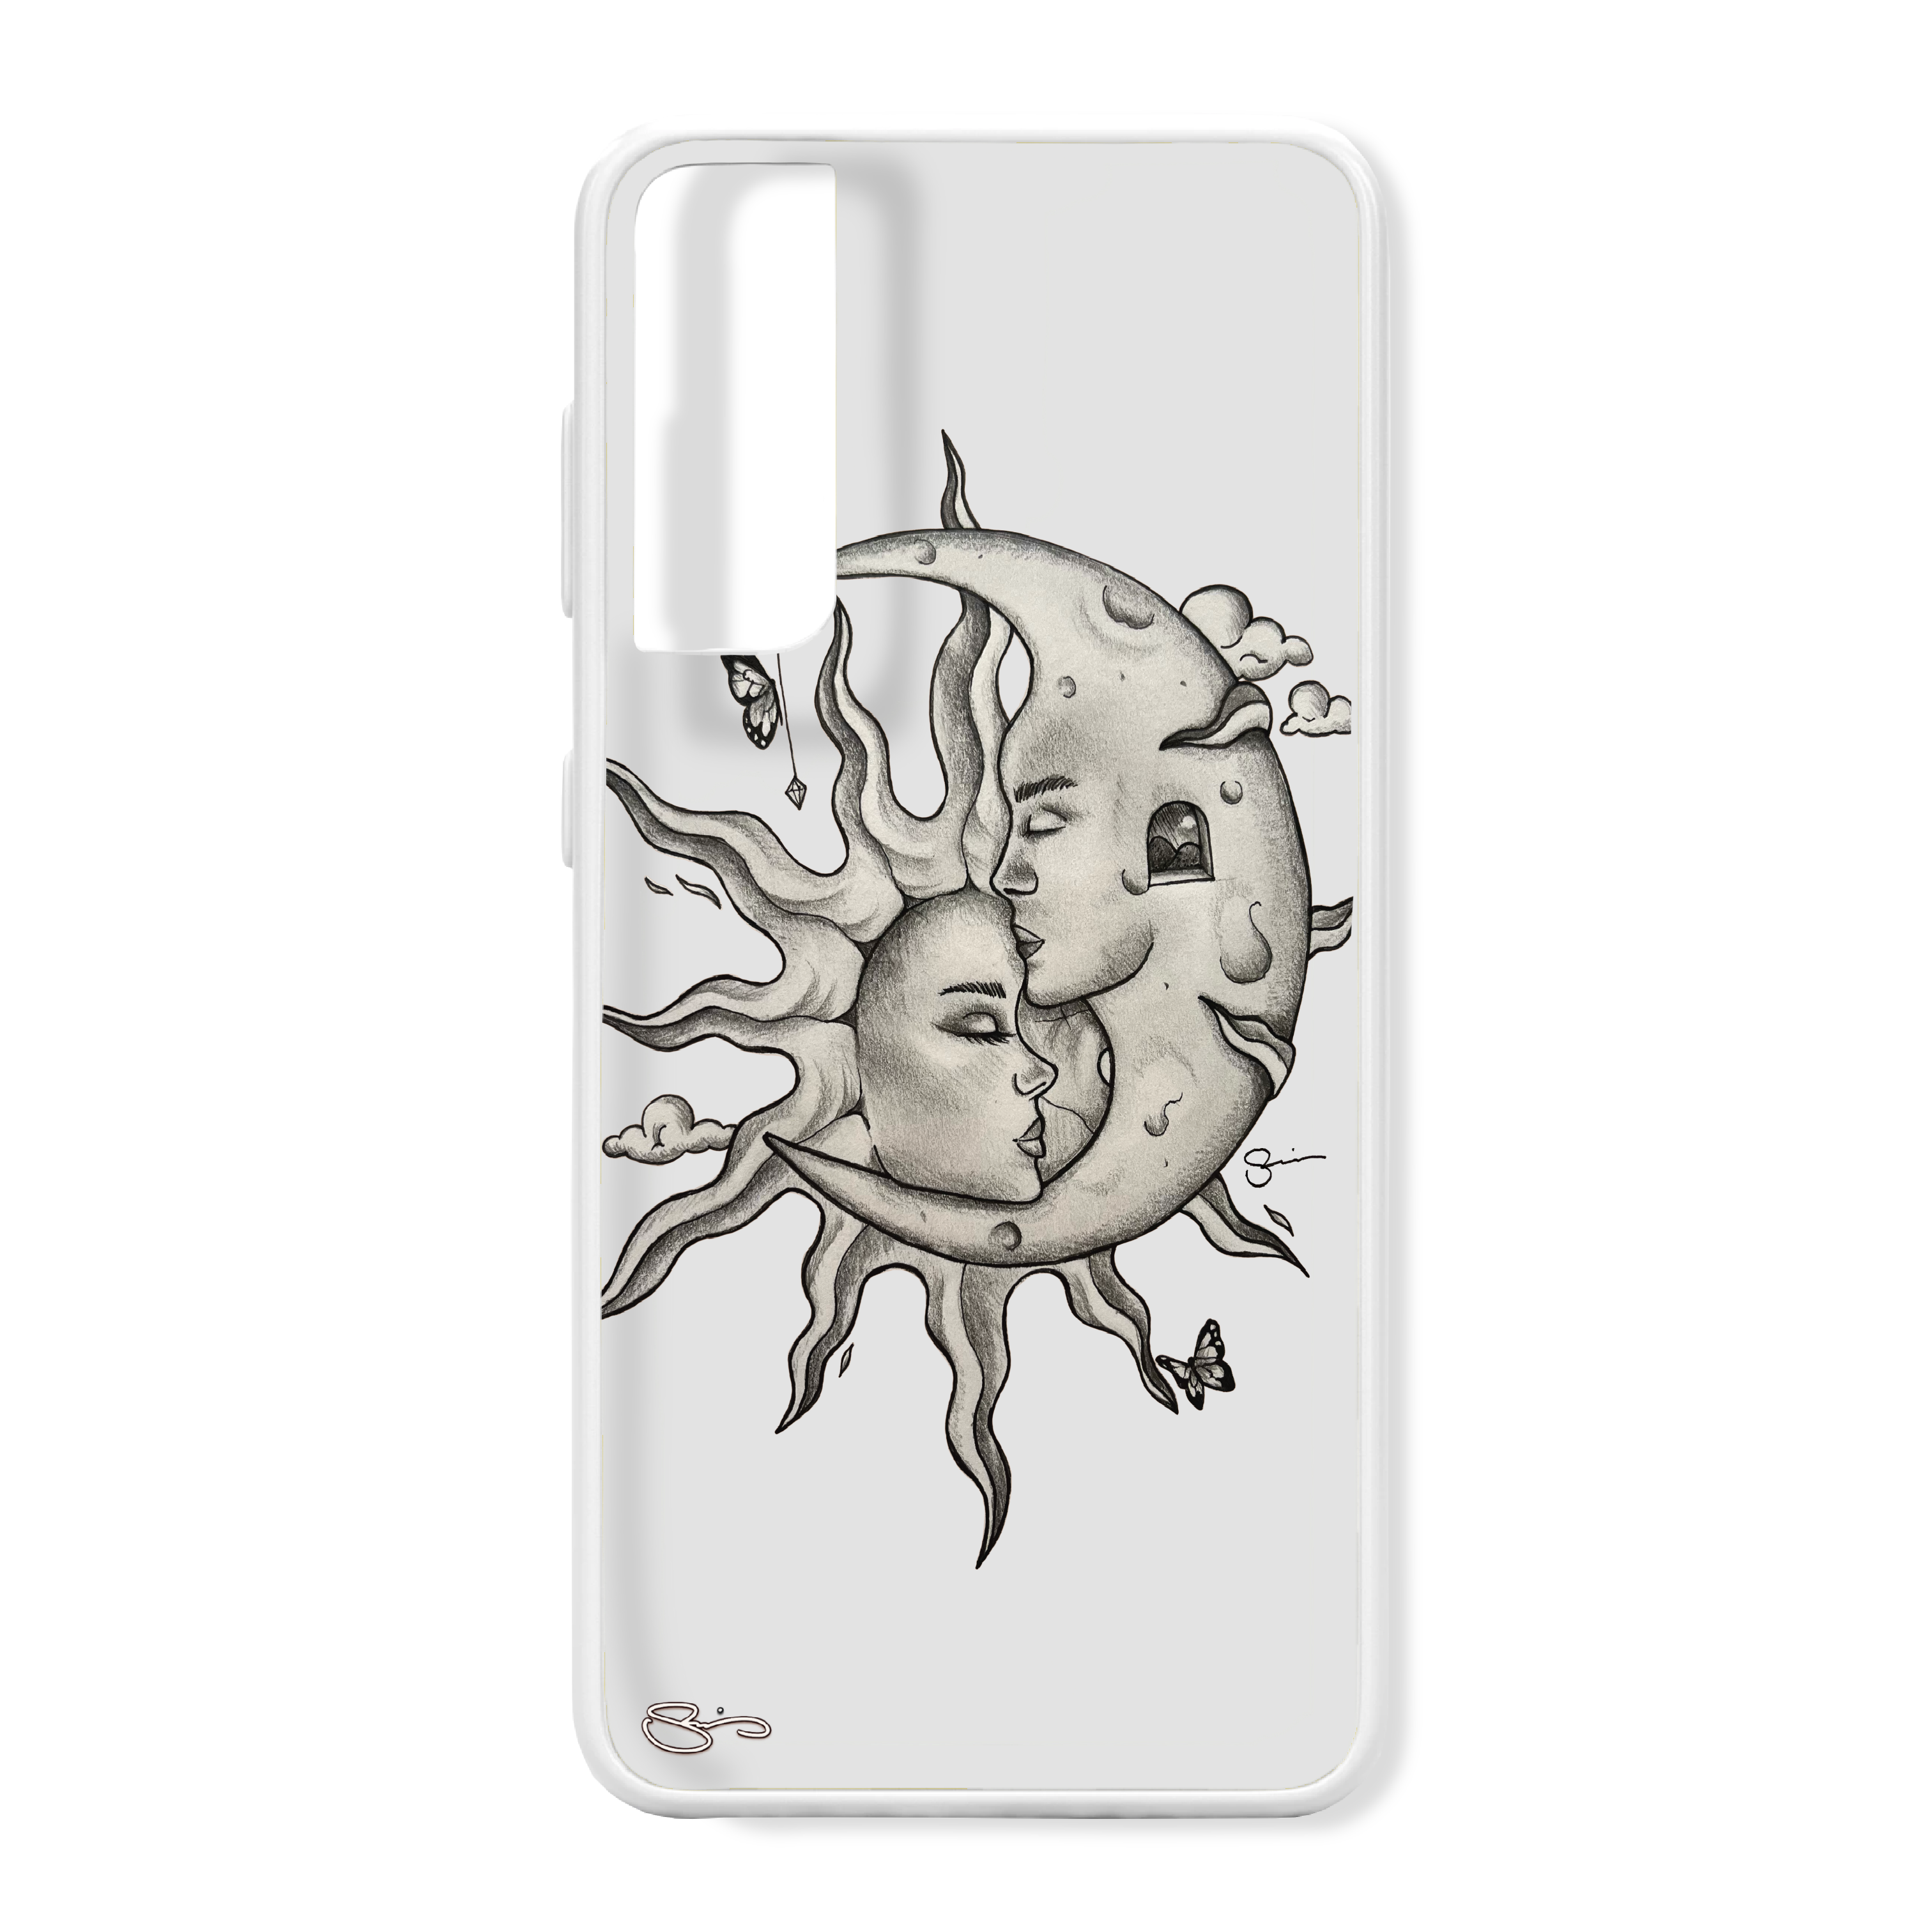 We Melt Into Eachother Samsung Case